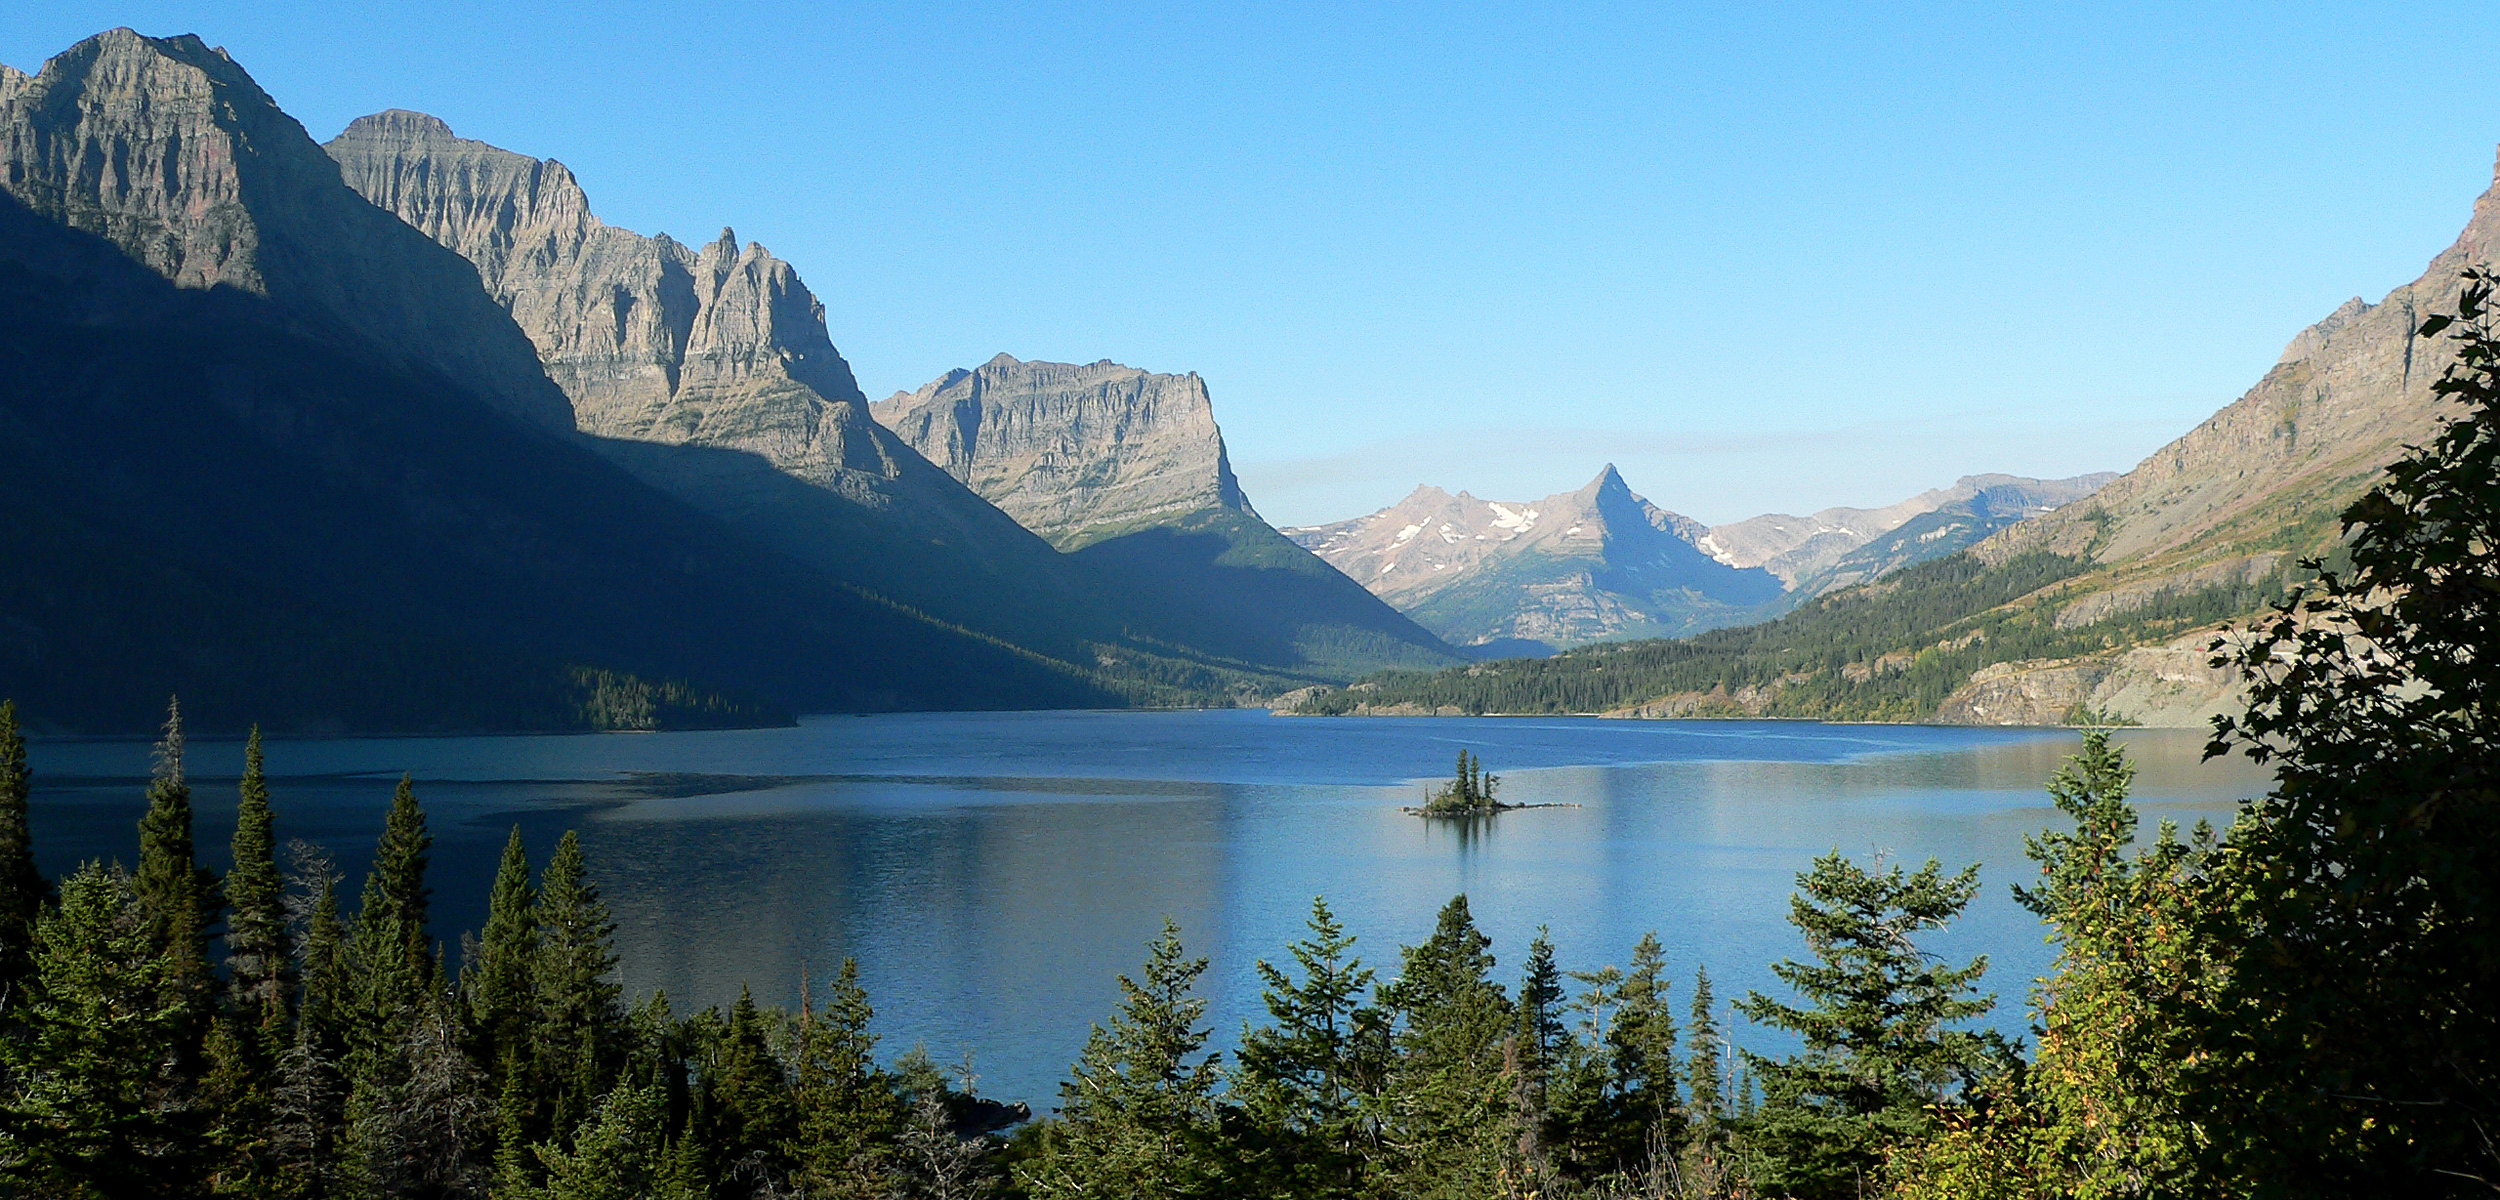 HD Quality Wallpaper | Collection: Earth, 2500x1200 Saint Mary Lake